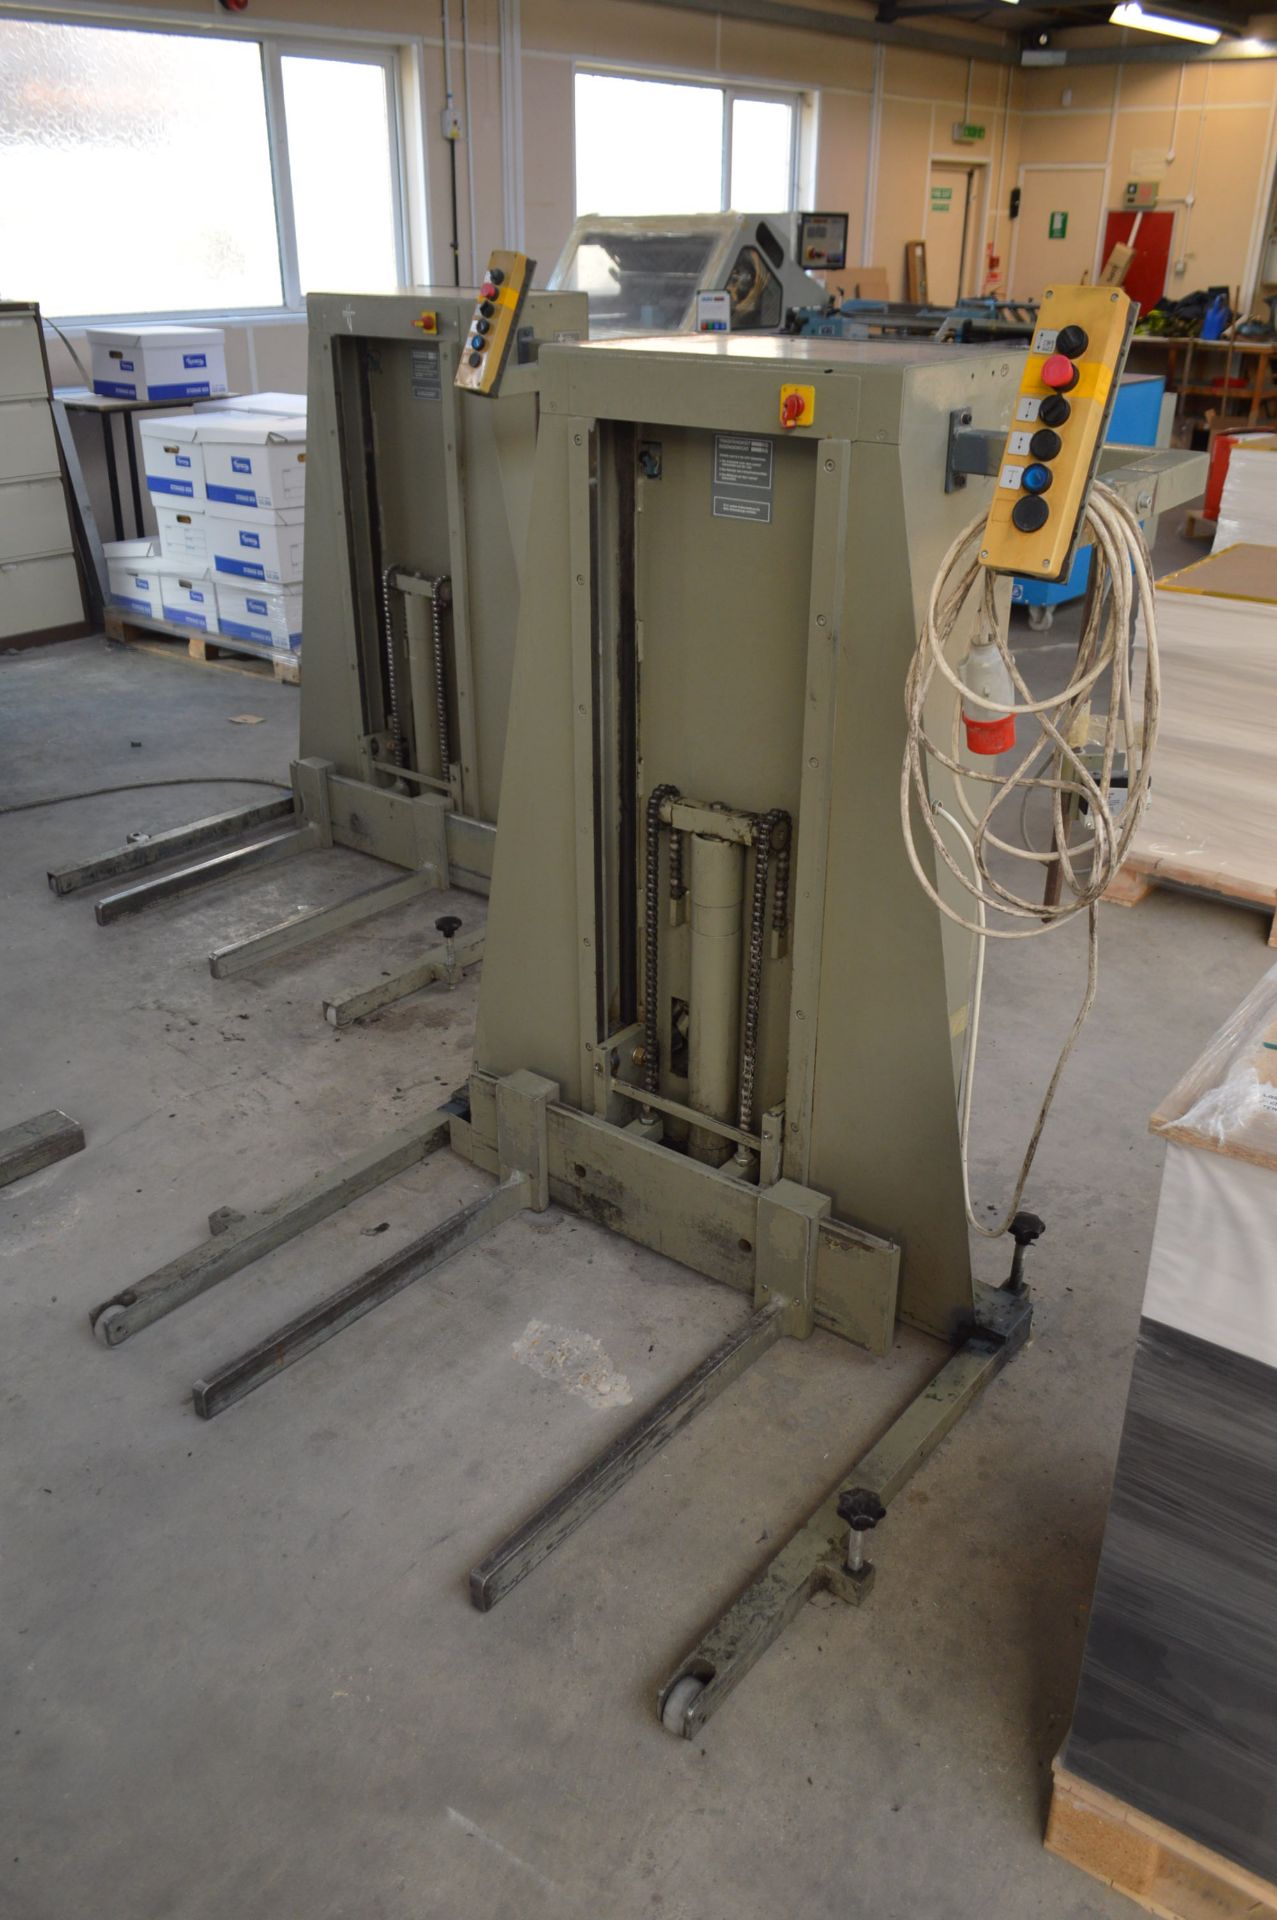 Polar SBP 600-3 Pile Lift, serial no. 5772015. This lot must be cleared by 4pm Friday 23 NOVEMBER